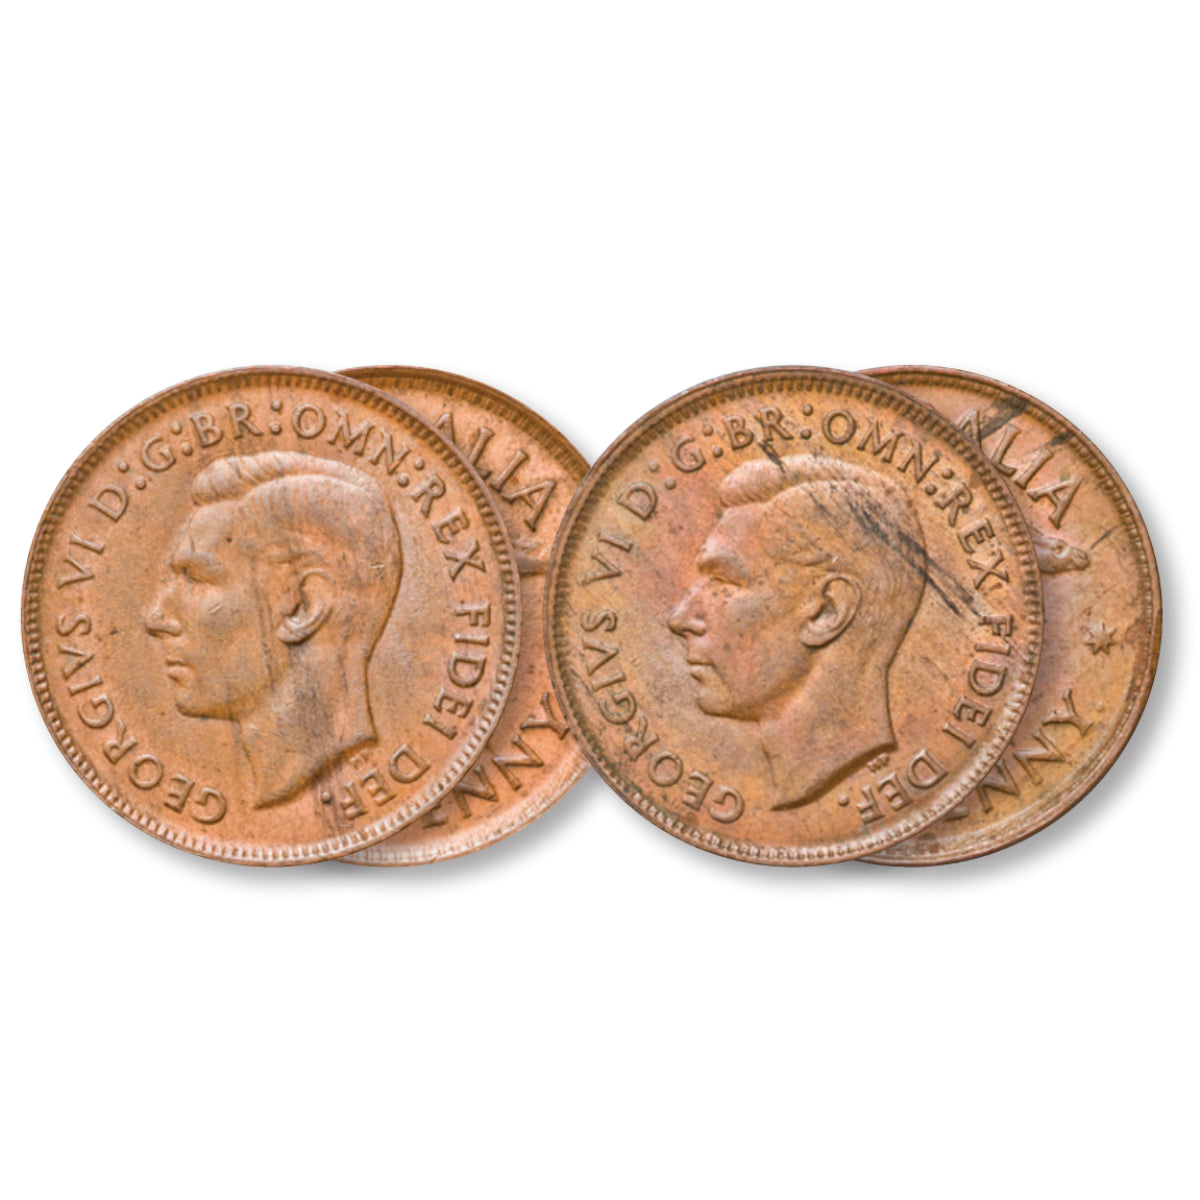 1951Y Halfpenny with 1952 Obverse & Standard Type Pair Extremely Fine